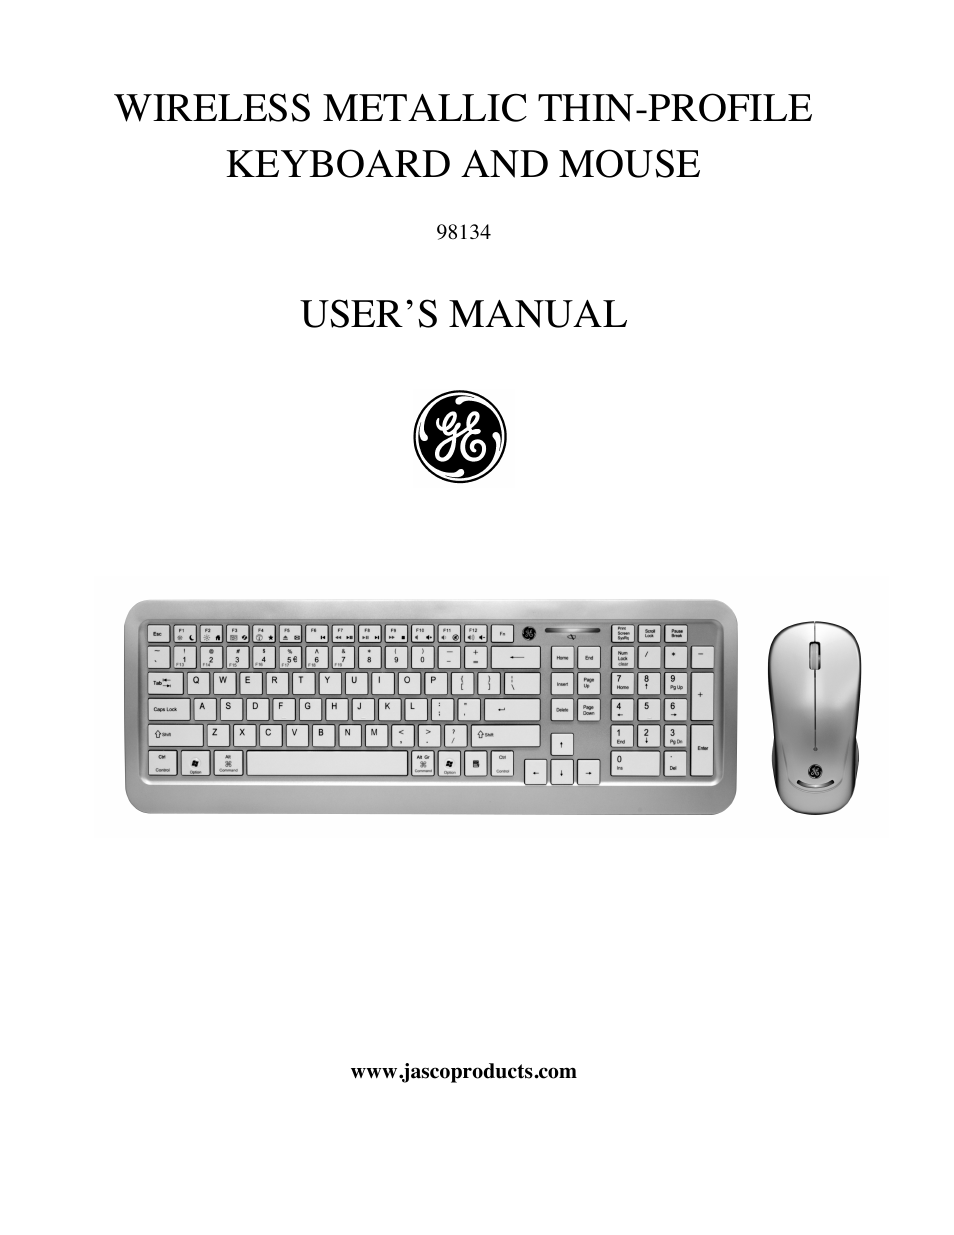 98134 GE Thin-Profile Keyboard and Mouse